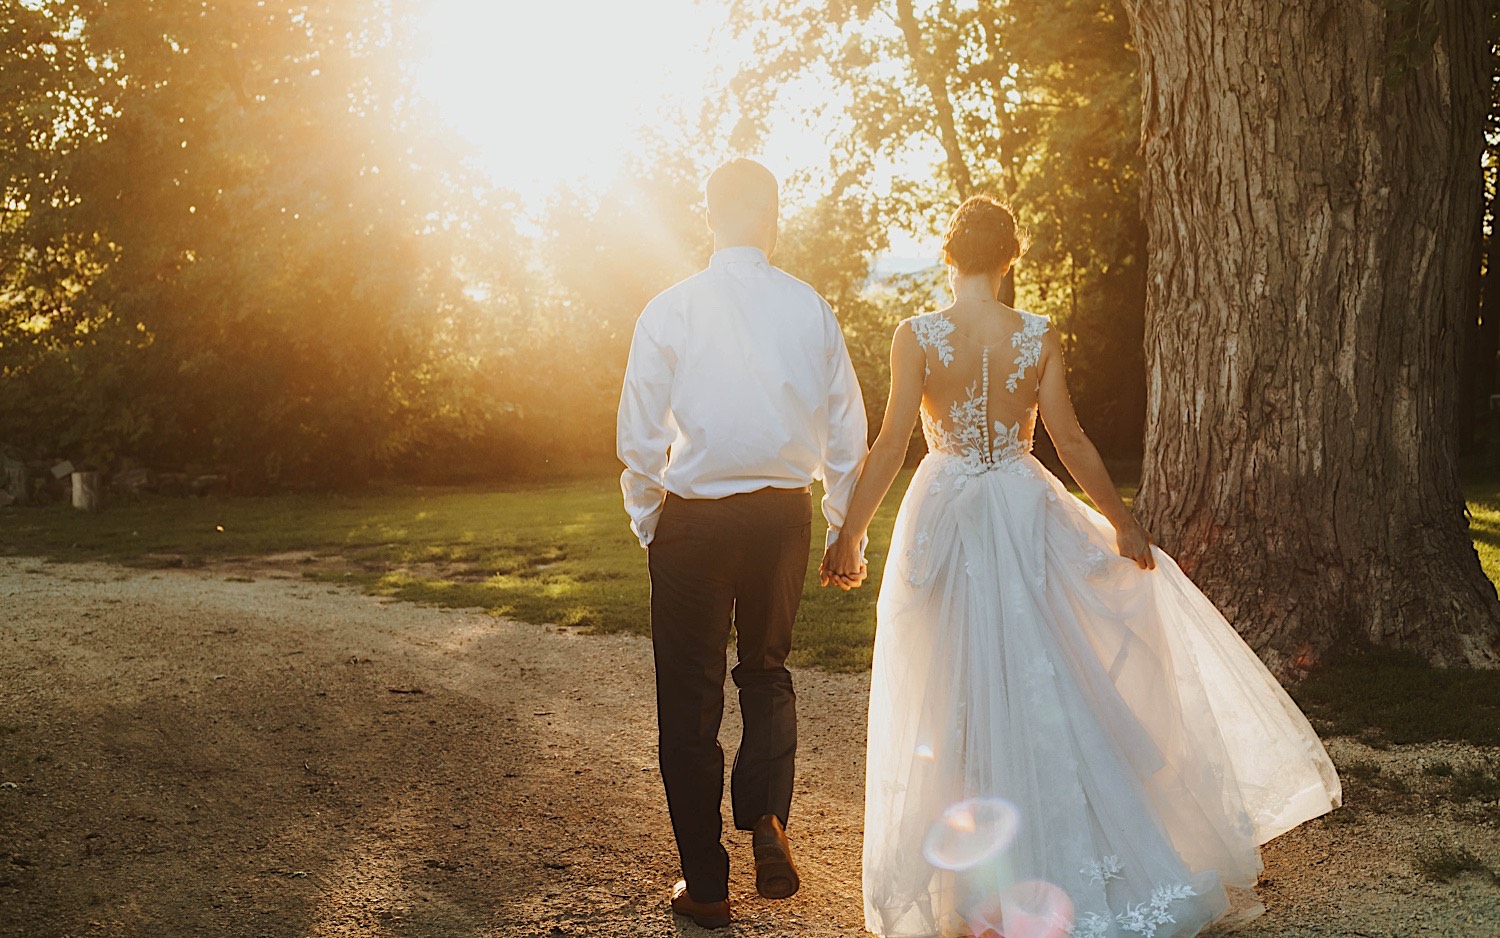 A bride and groom walk hand in hand along a dirt road away from the camera towards the sunset while at their wedding venue Legacy Hill Farm